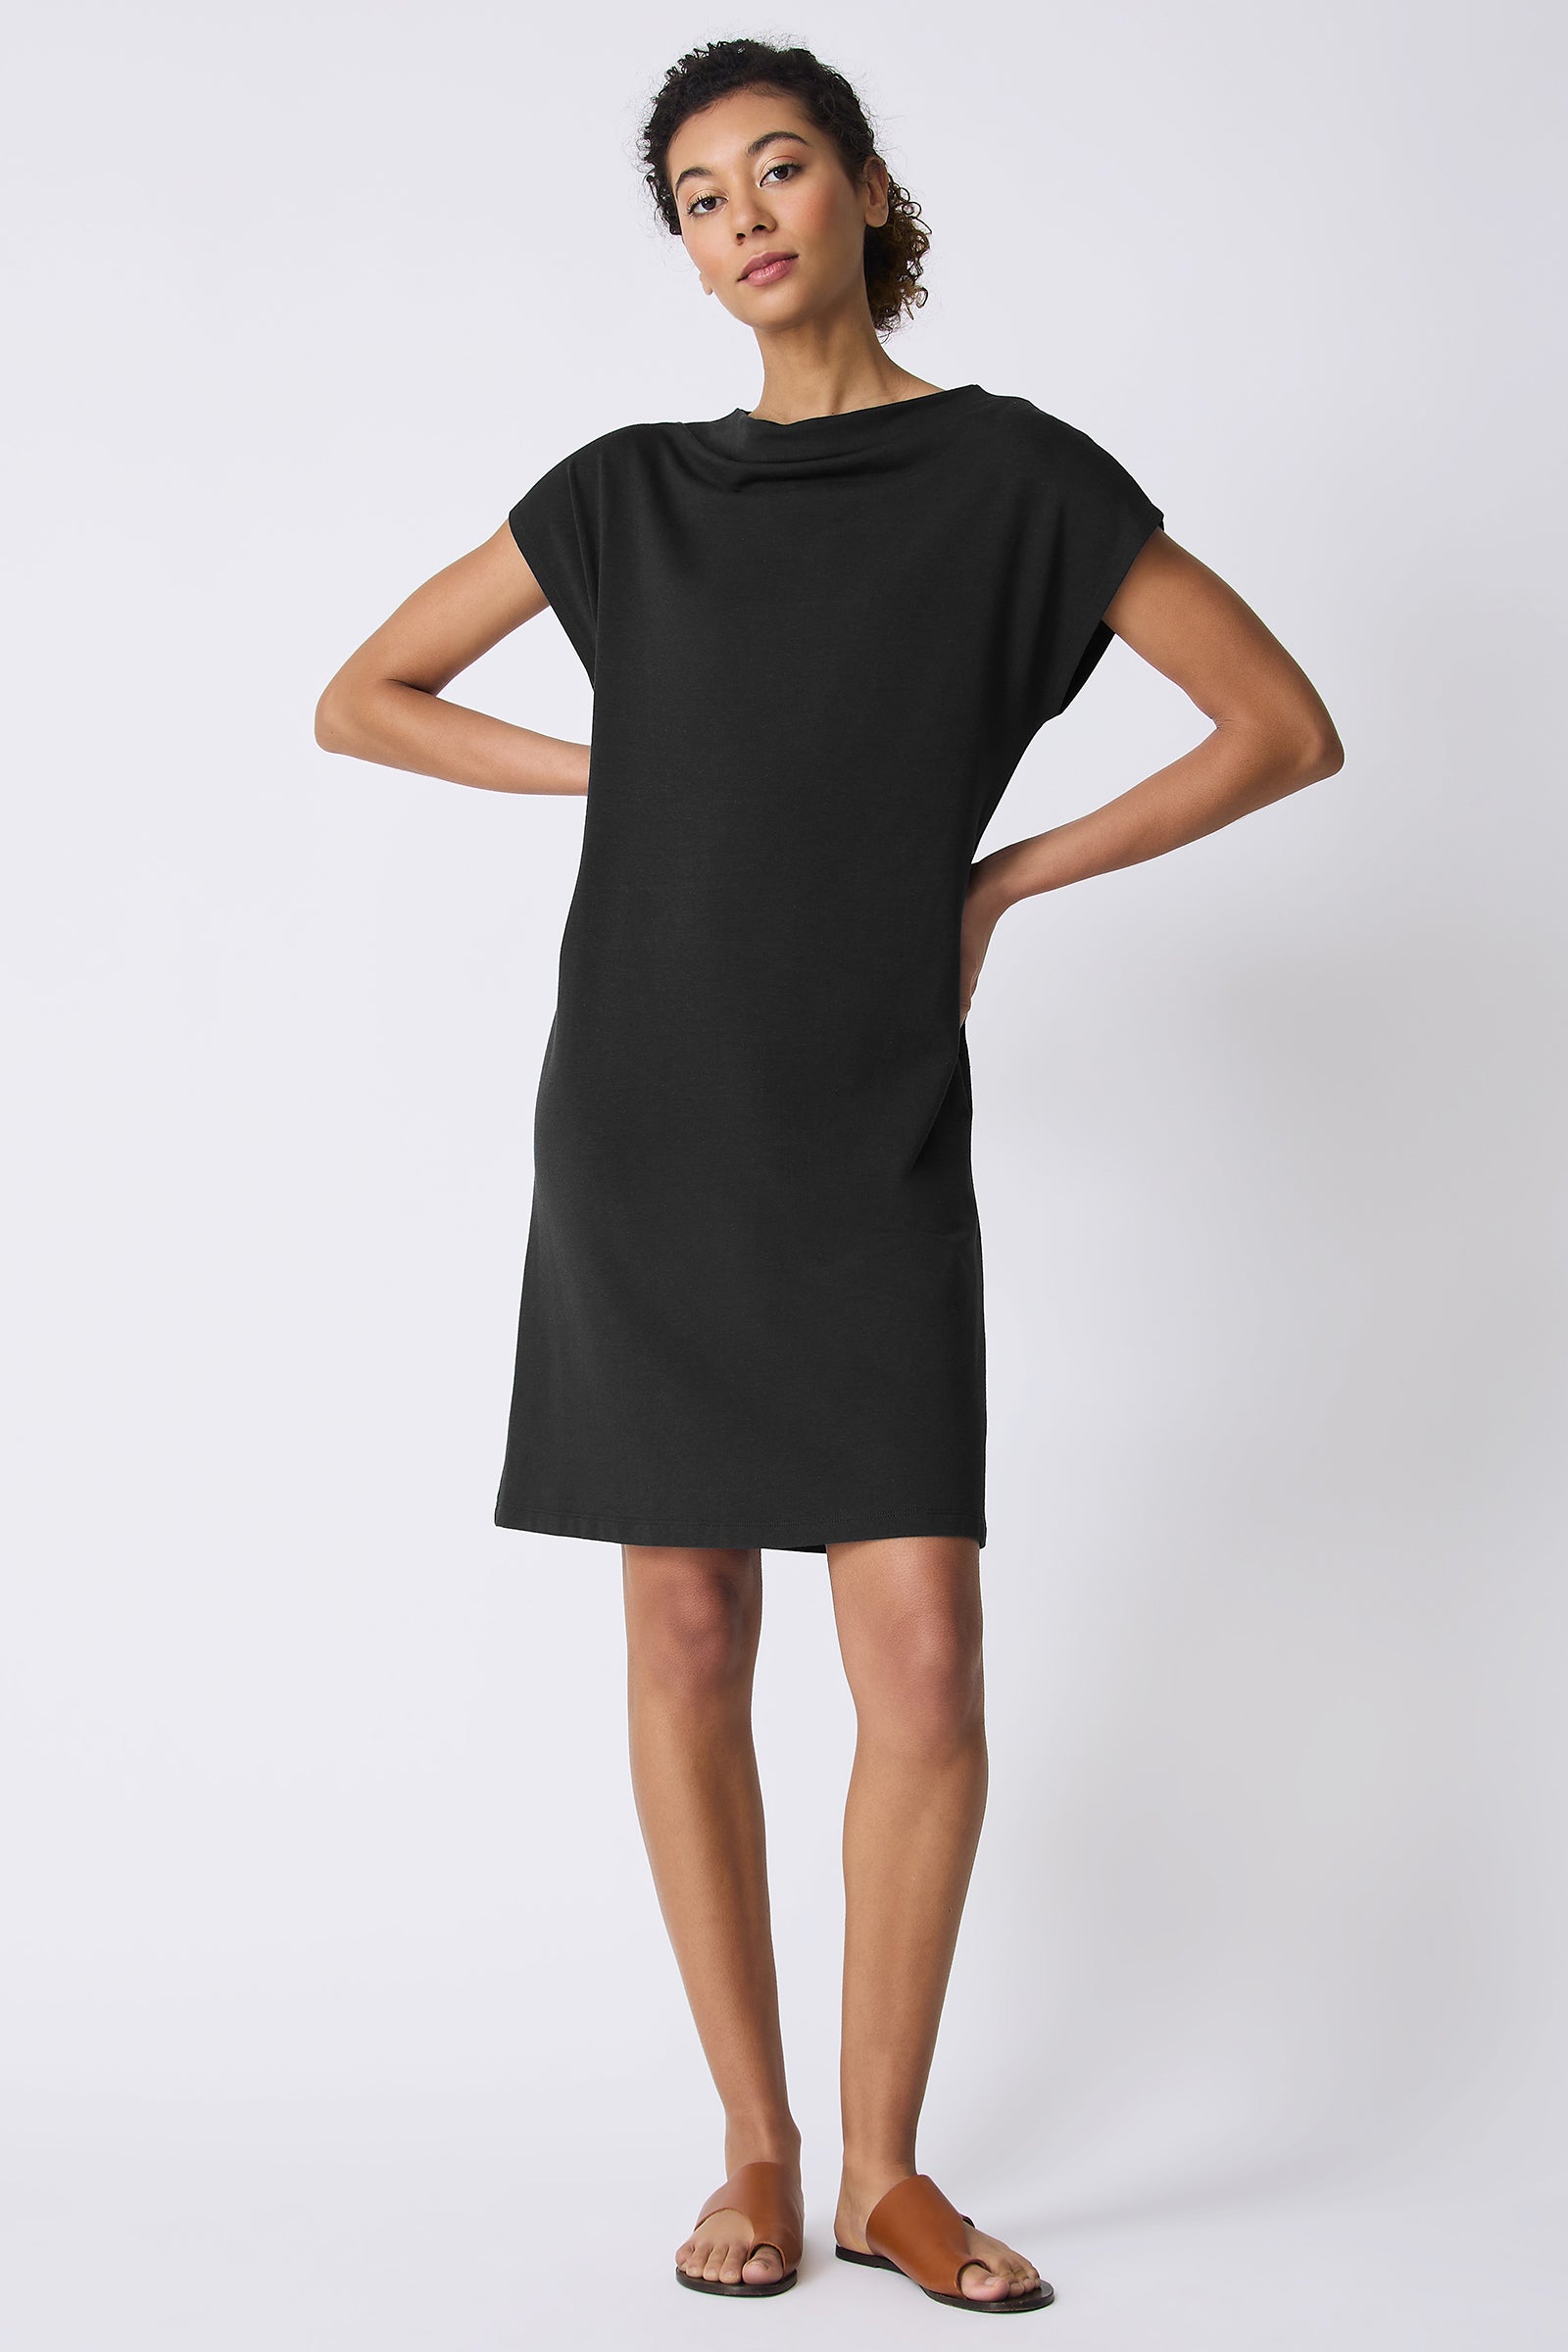 Kal Rieman Luca Cowl Dress in Black on model with hands on hips full front view